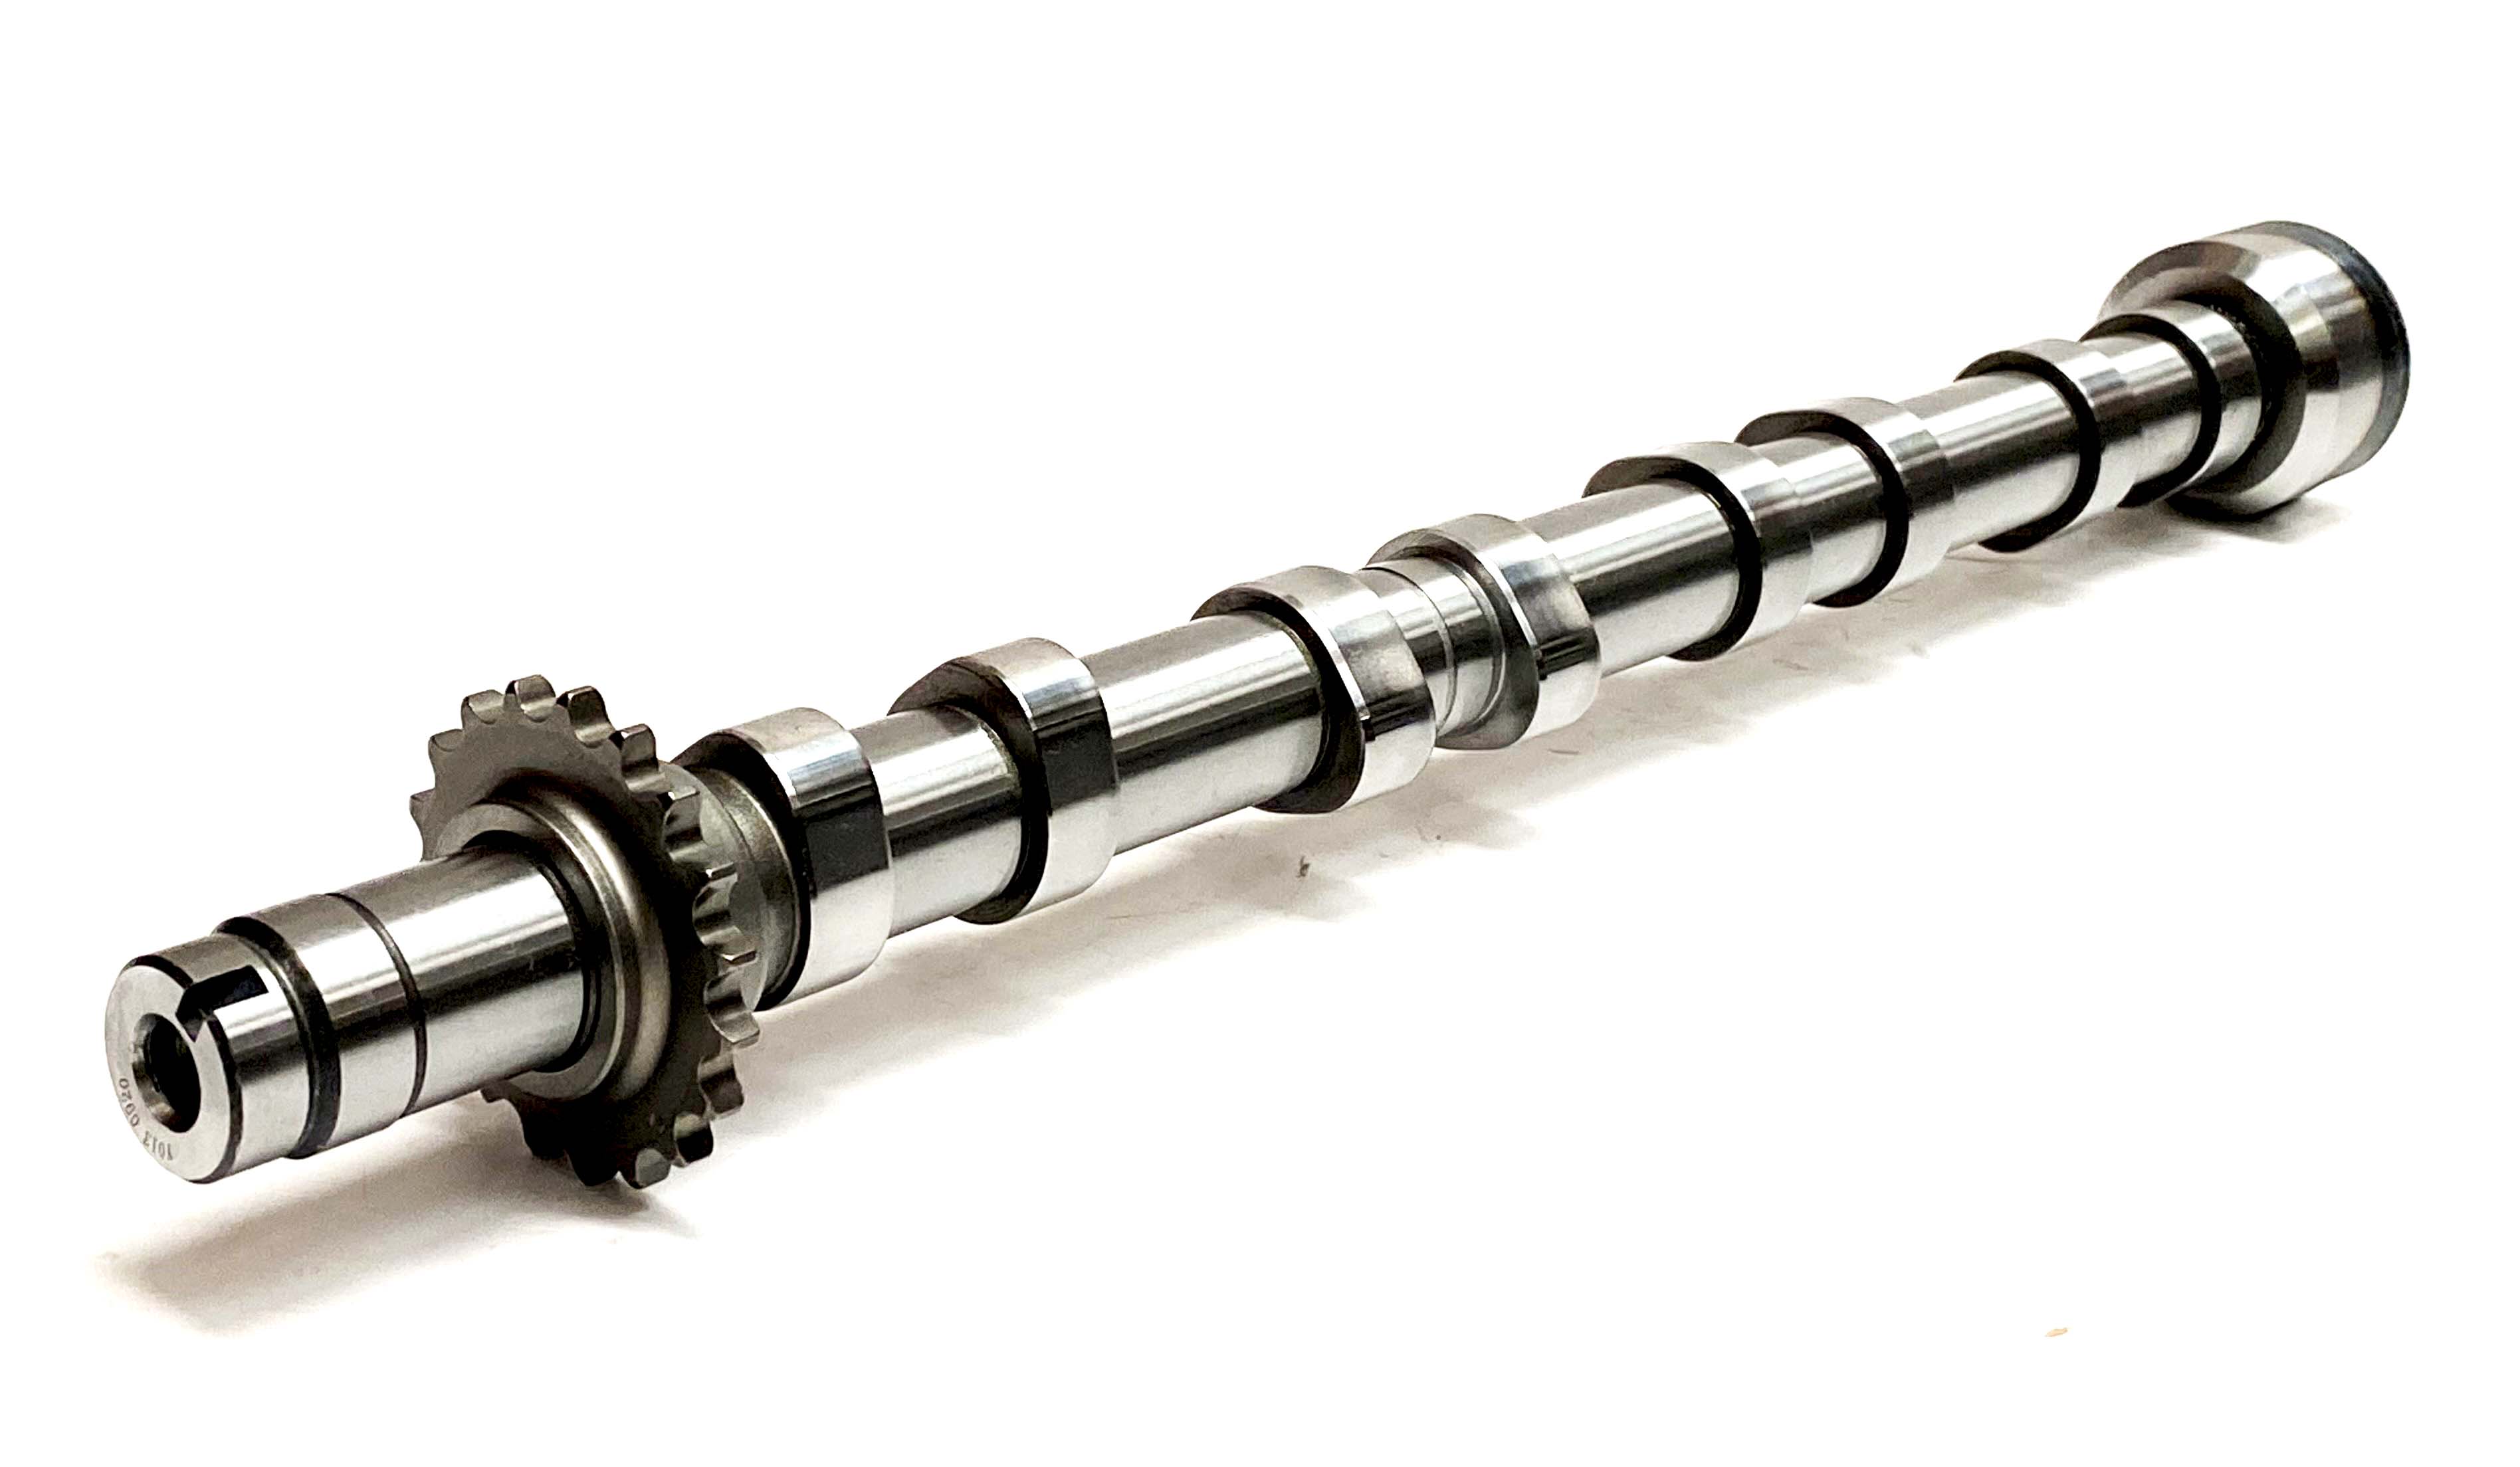 Exhaust Camshaft for Ford C-Max, Focus, Galaxy, Kuga, S-Max